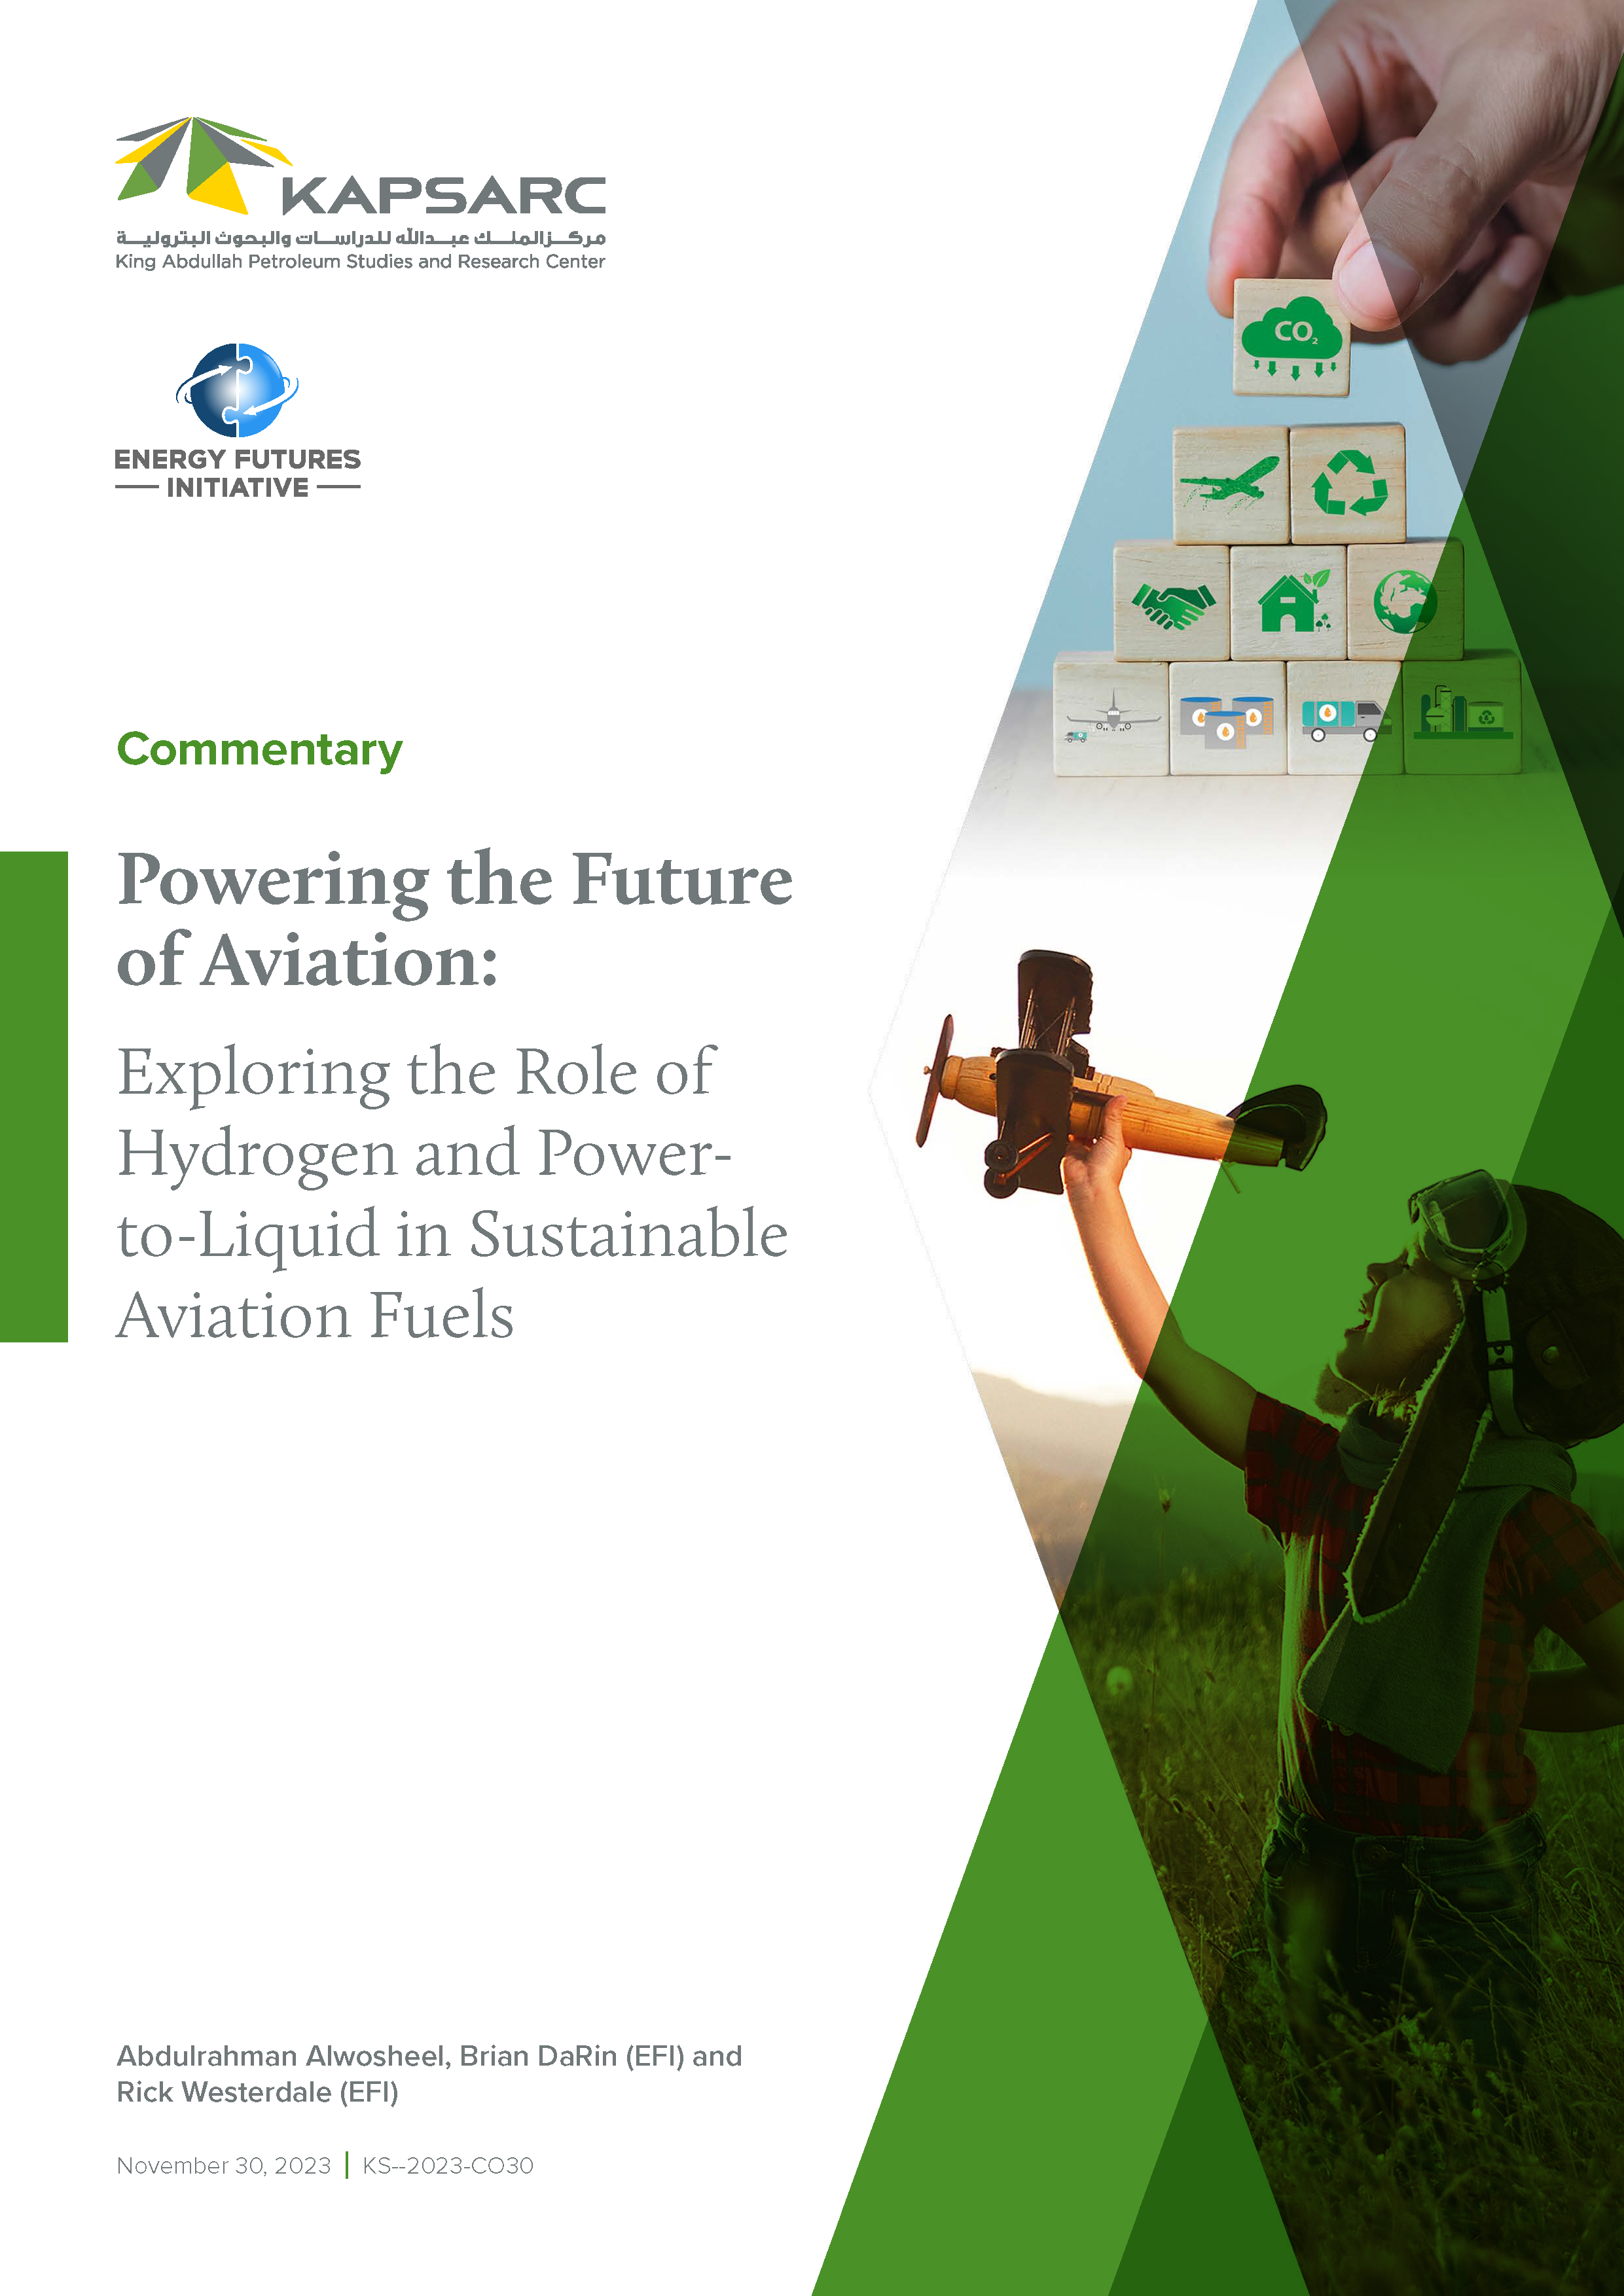 Powering the Future of Aviation: Exploring the Role of Hydrogen and Power-to- Liquid in Sustainable Aviation Fuels